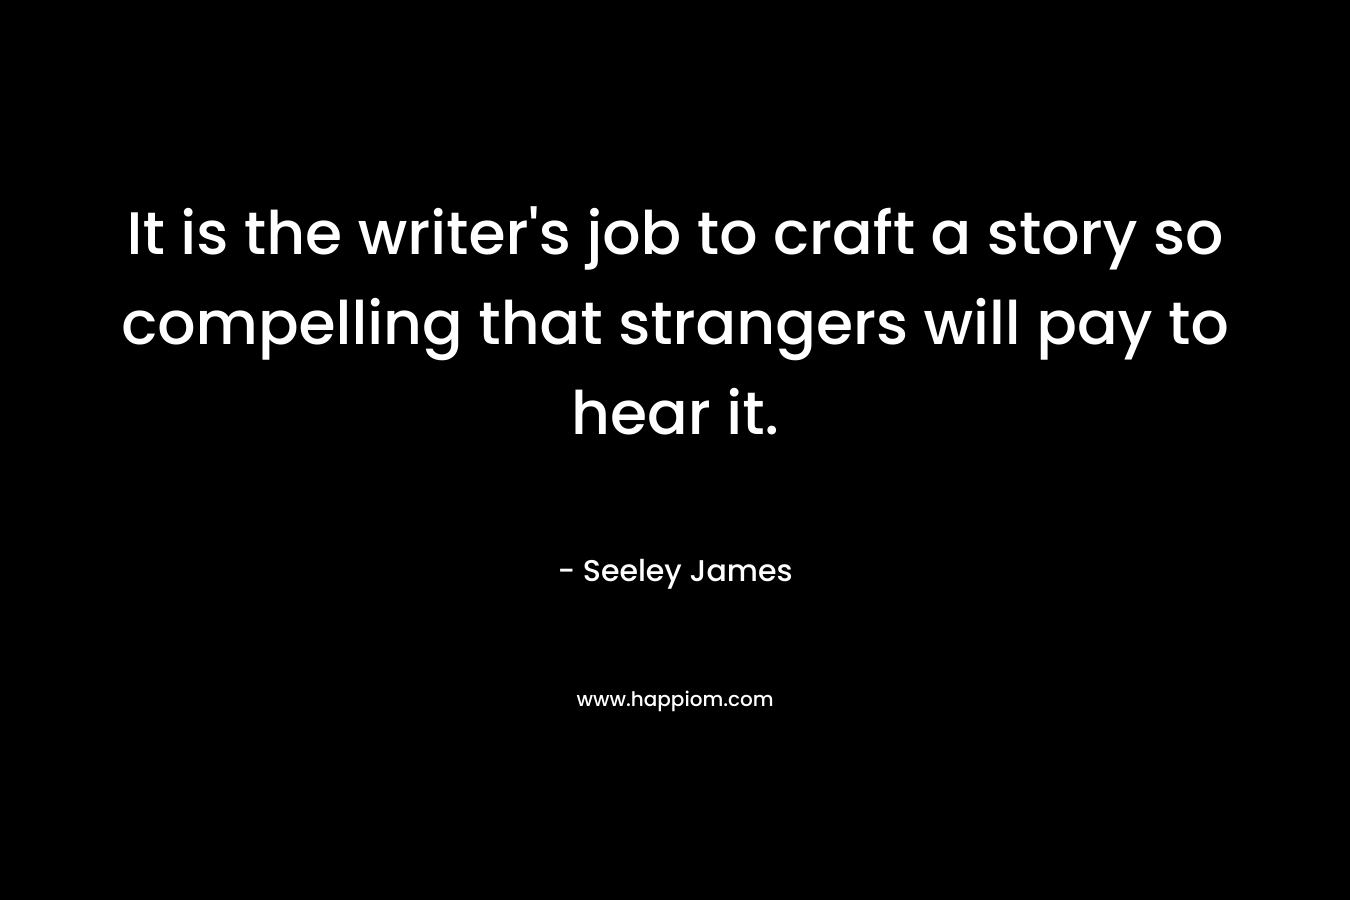 It is the writer’s job to craft a story so compelling that strangers will pay to hear it. – Seeley James